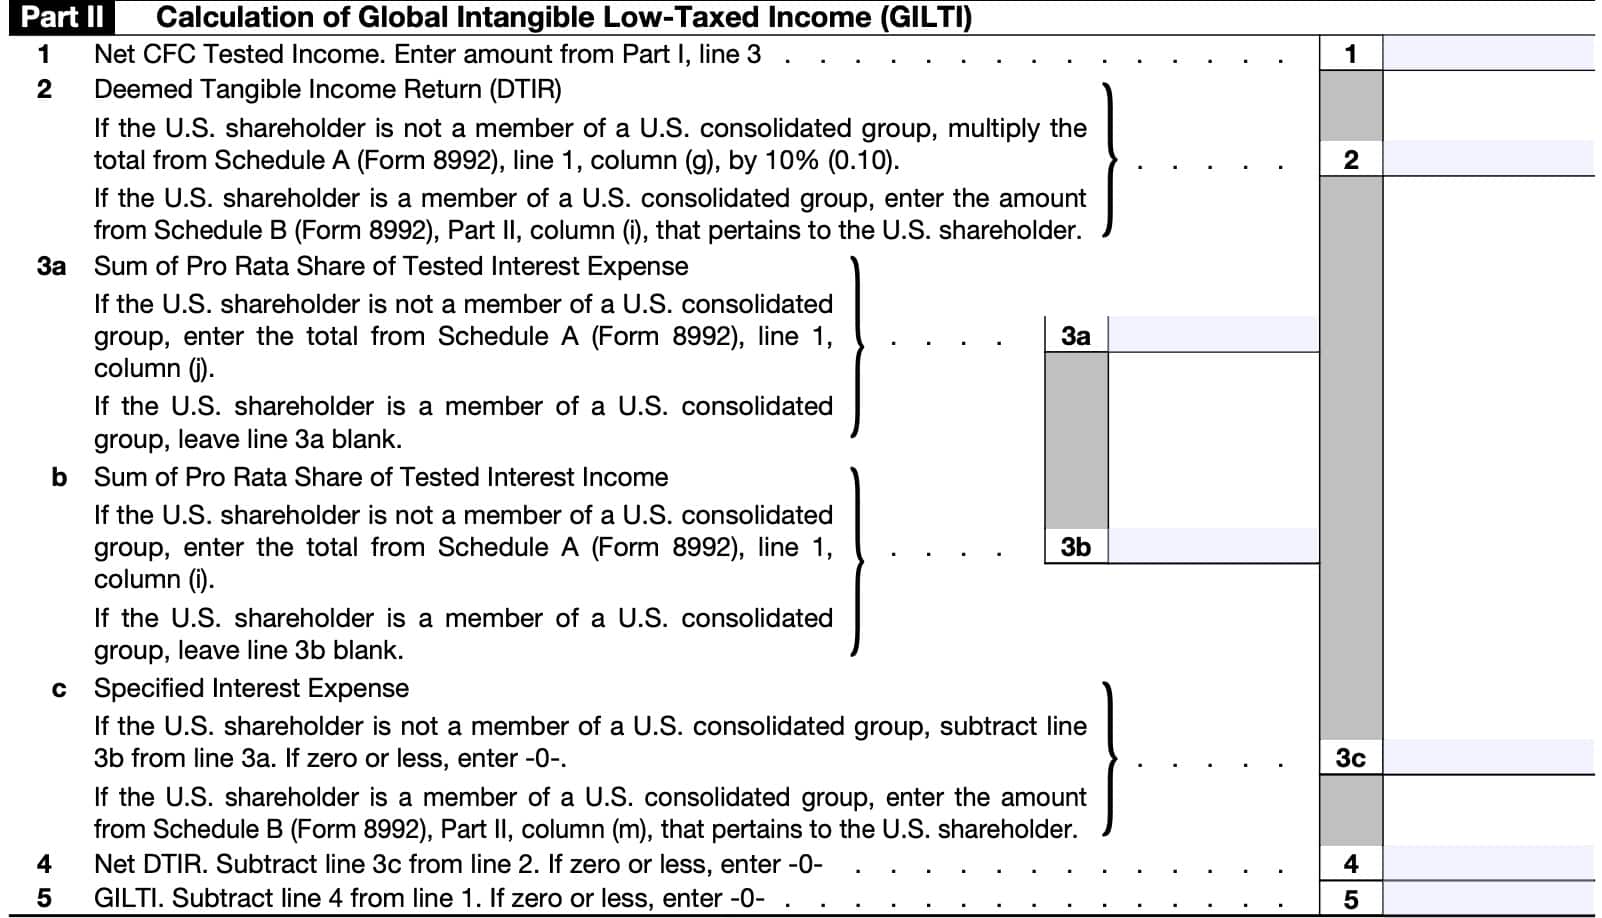 irs form 8992, part ii: calculation of global intangible low-taxed income (gilti)